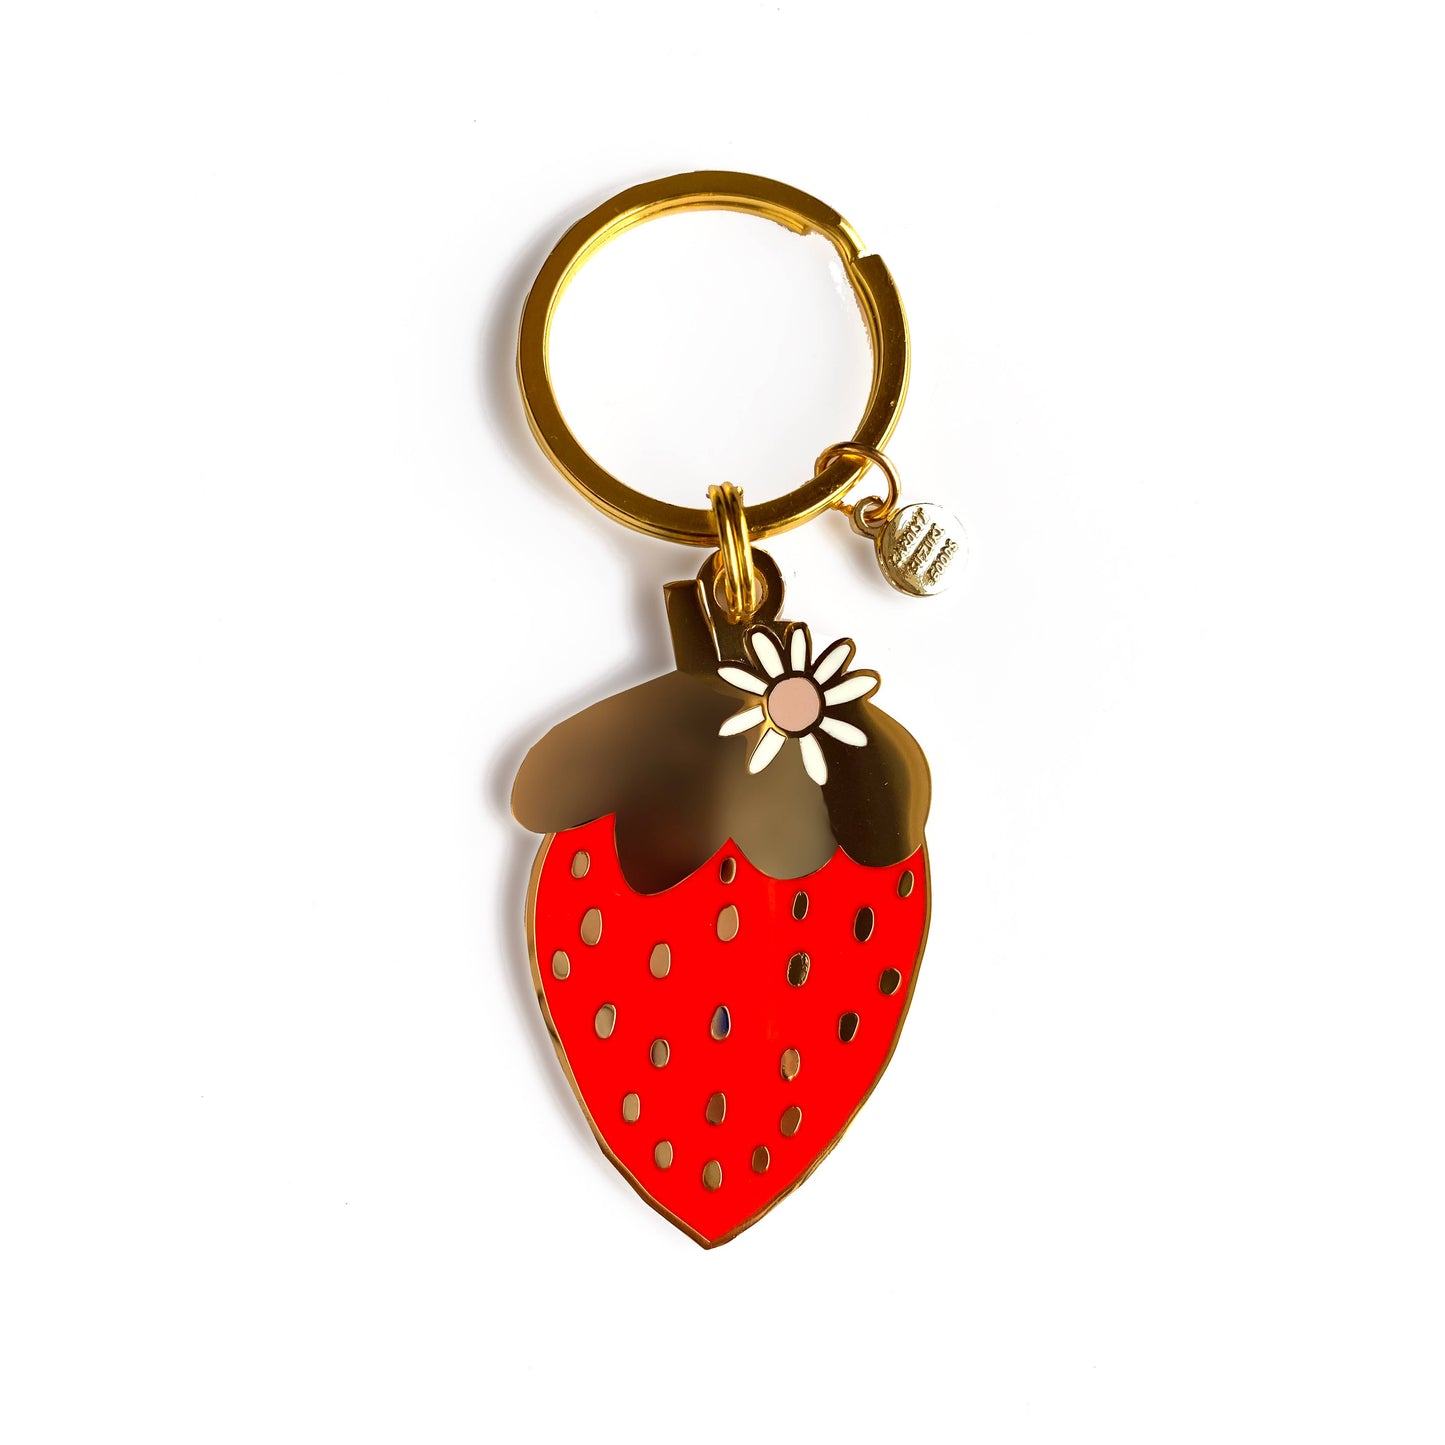 Gold, hard enamel strawberry keychain. Mostly gold with the body of the strawberry being red. There is a white daisy in the upper right next to the stem. 